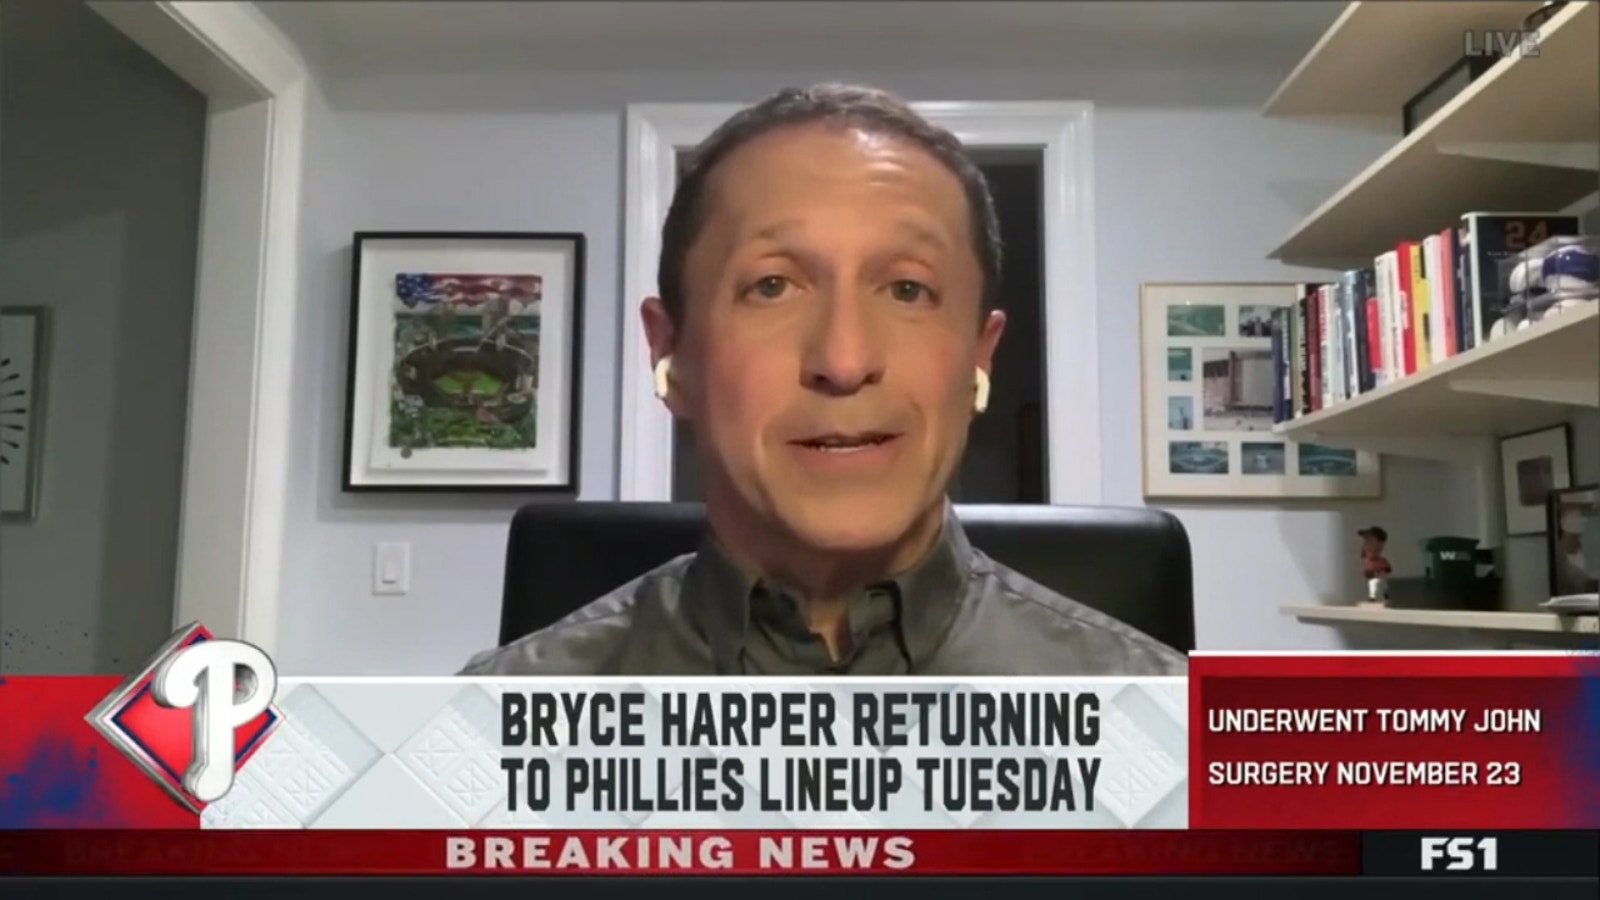 Ken Rosenthal on Bryce Harper returning to Phillies' lineup on Tuesday